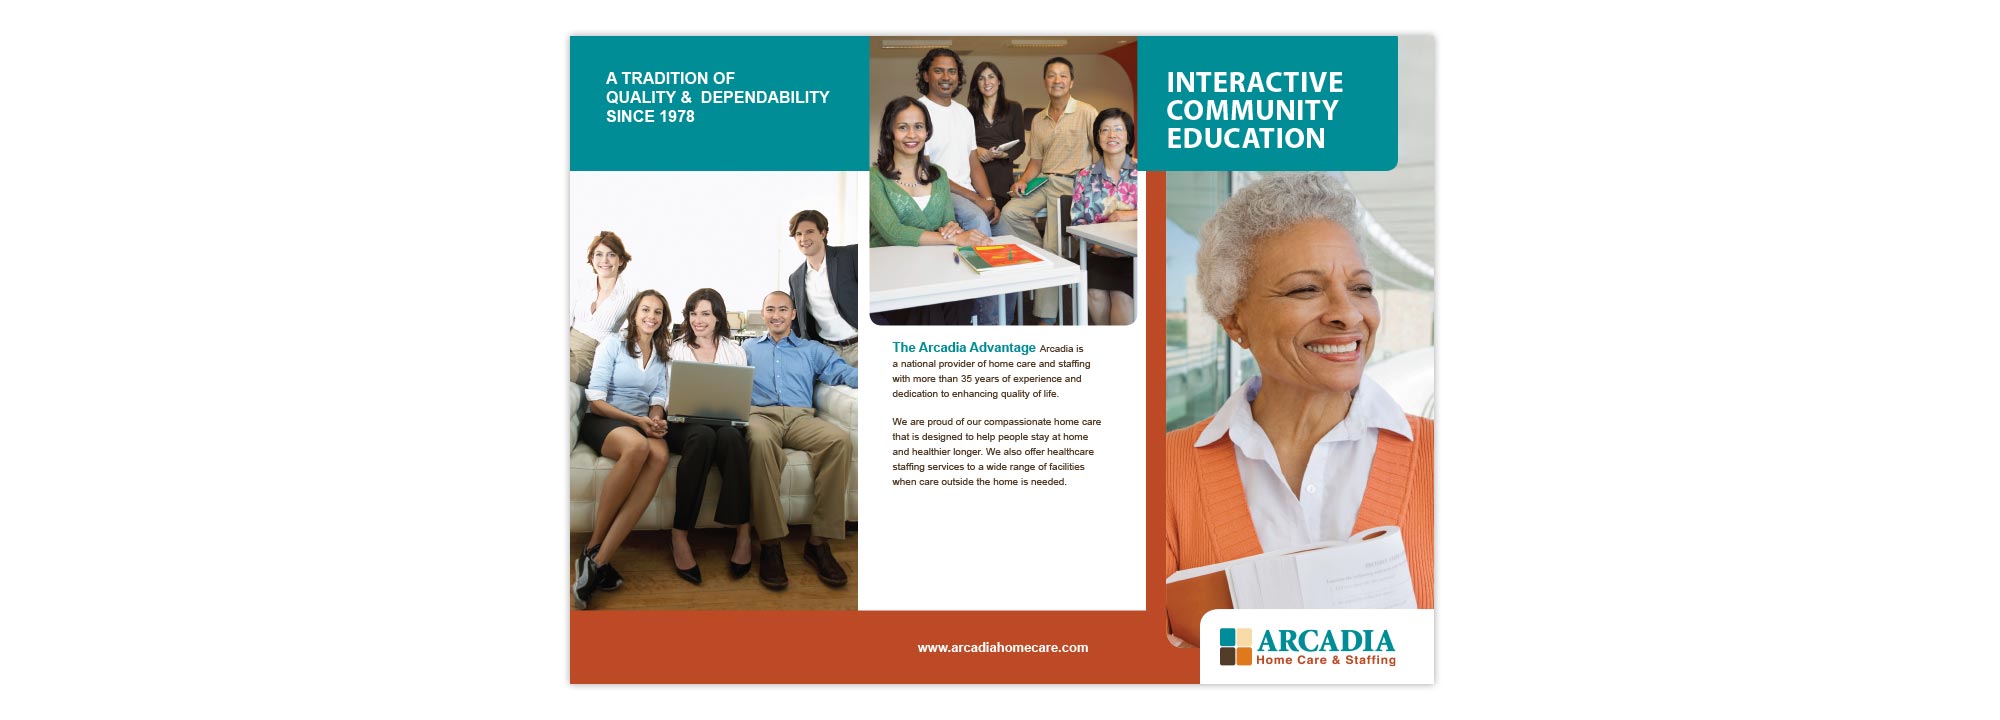 Arcadia Home Care & Staffing Brochure